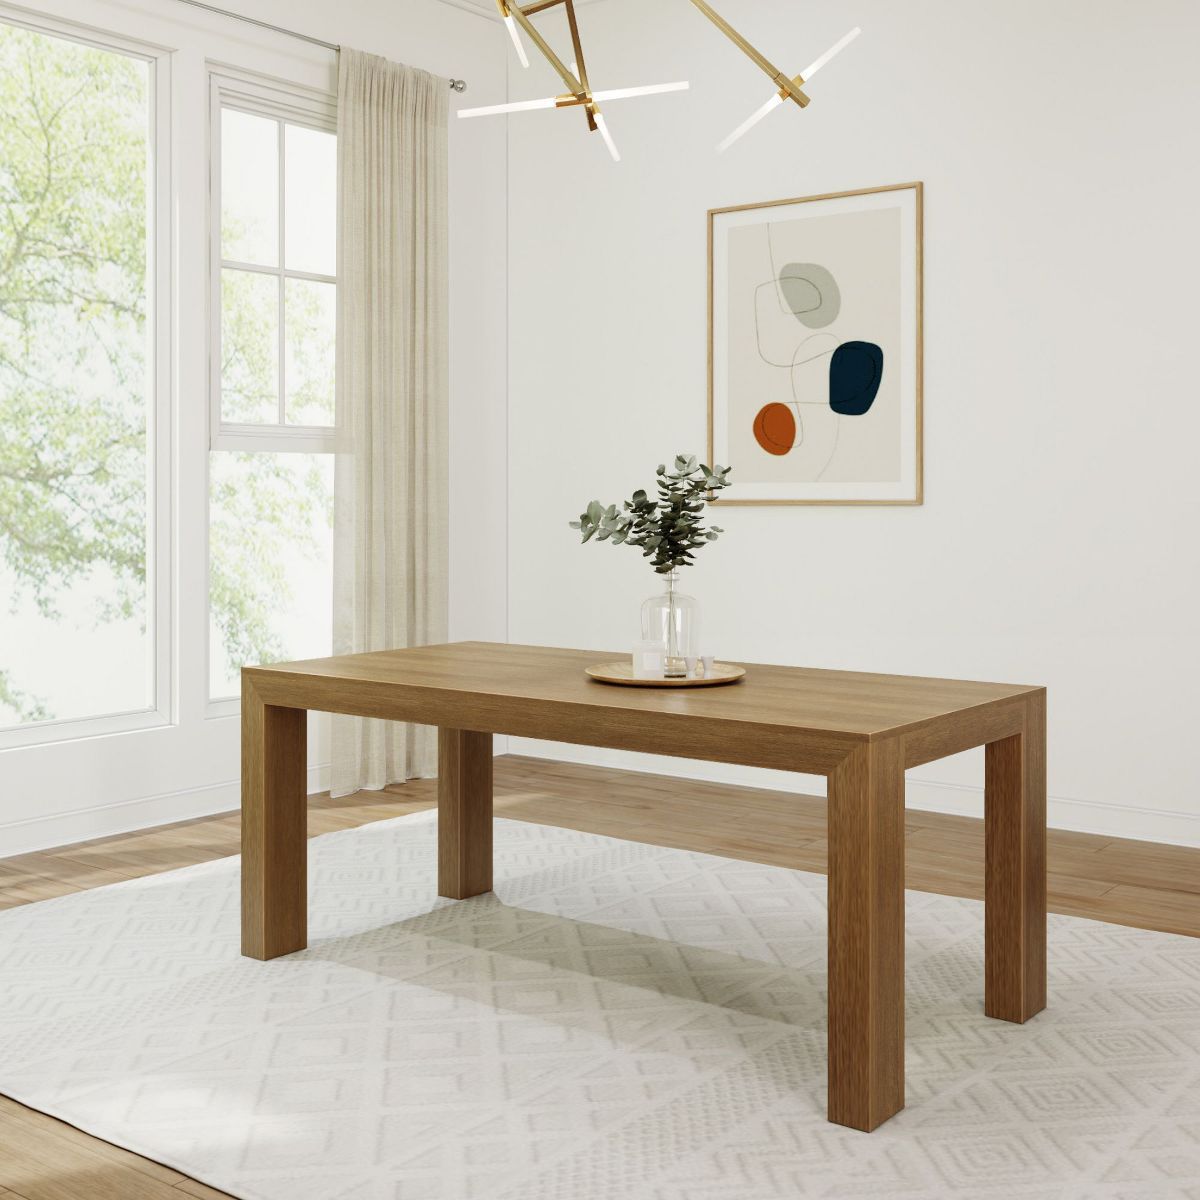 Plank+Beam Modern Wood Dining Table, Solid Wood Rectangular Table for Kitchen/Dining Room, 72 Inc... | Target